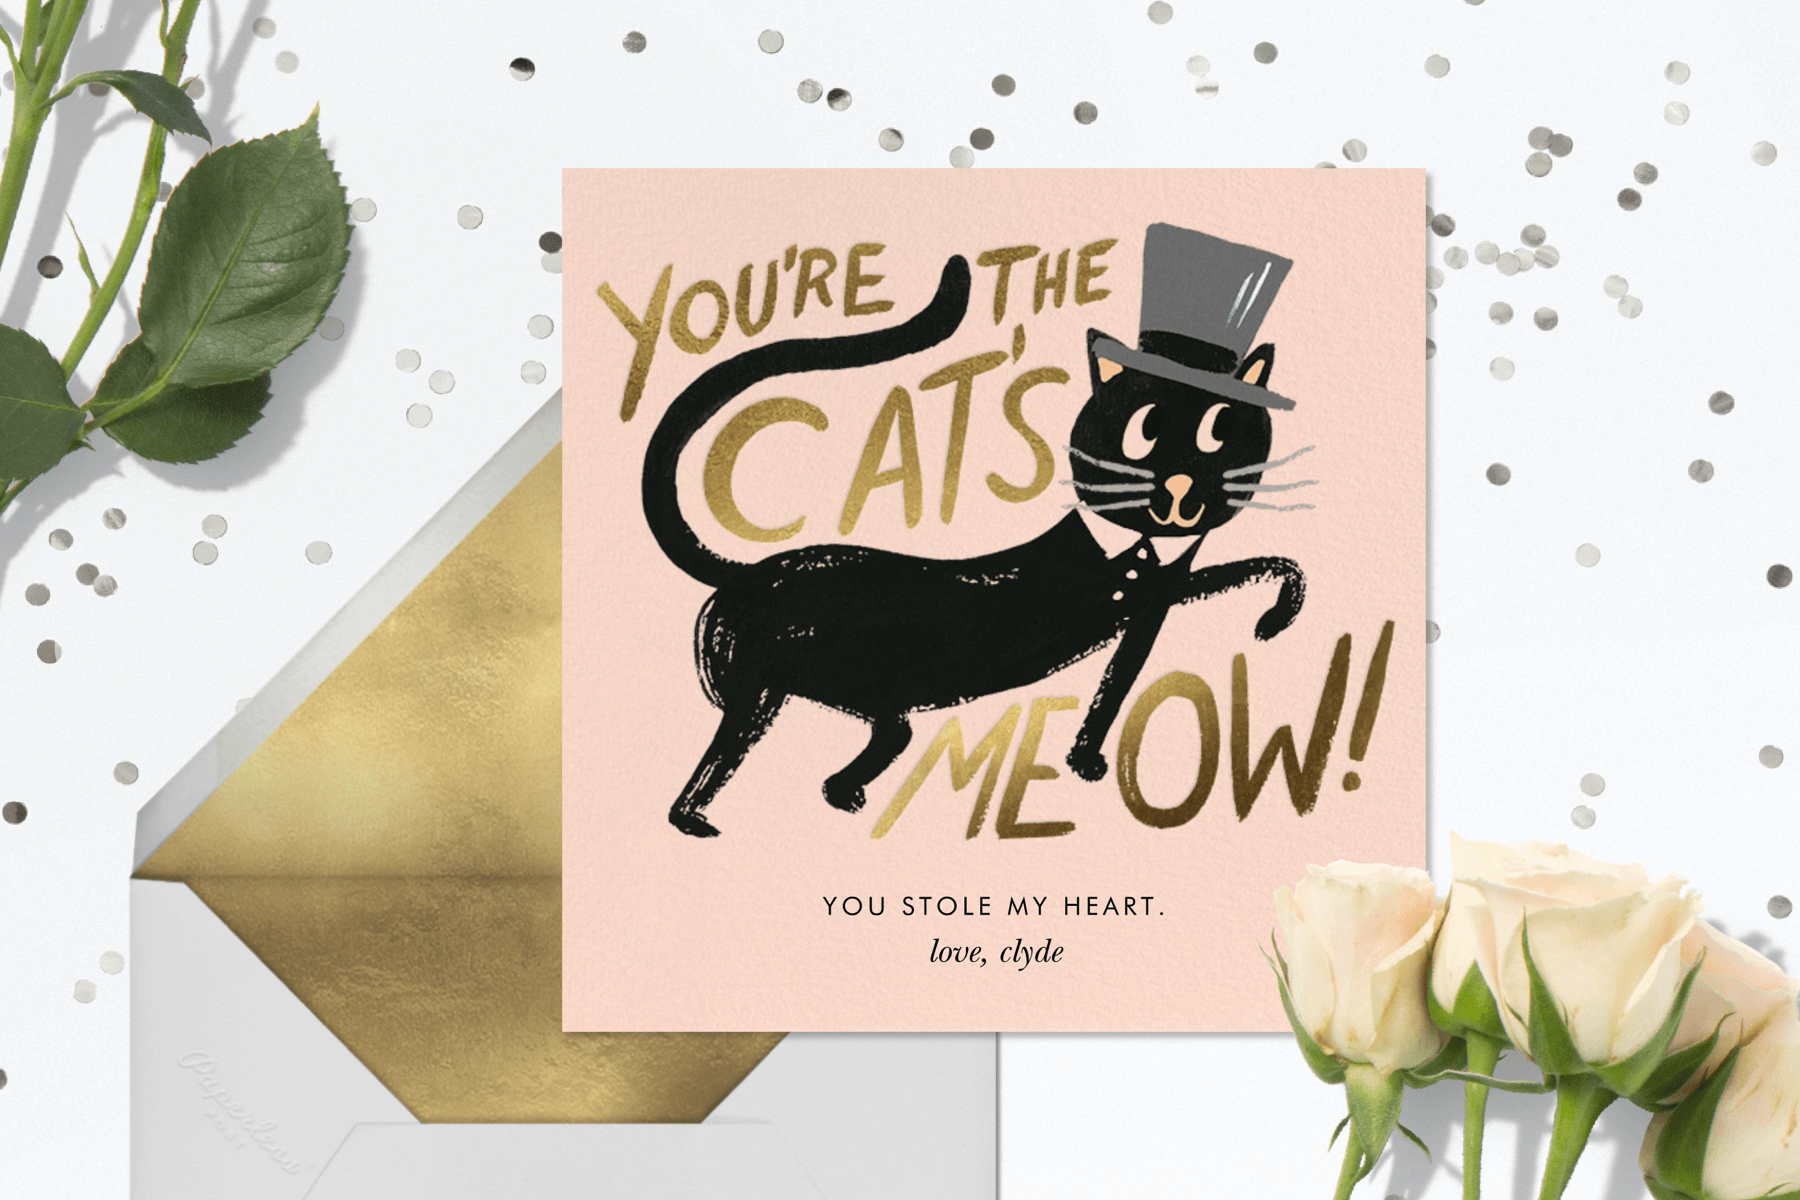 A Valentine’s Day card featuring a cat with a top hat.